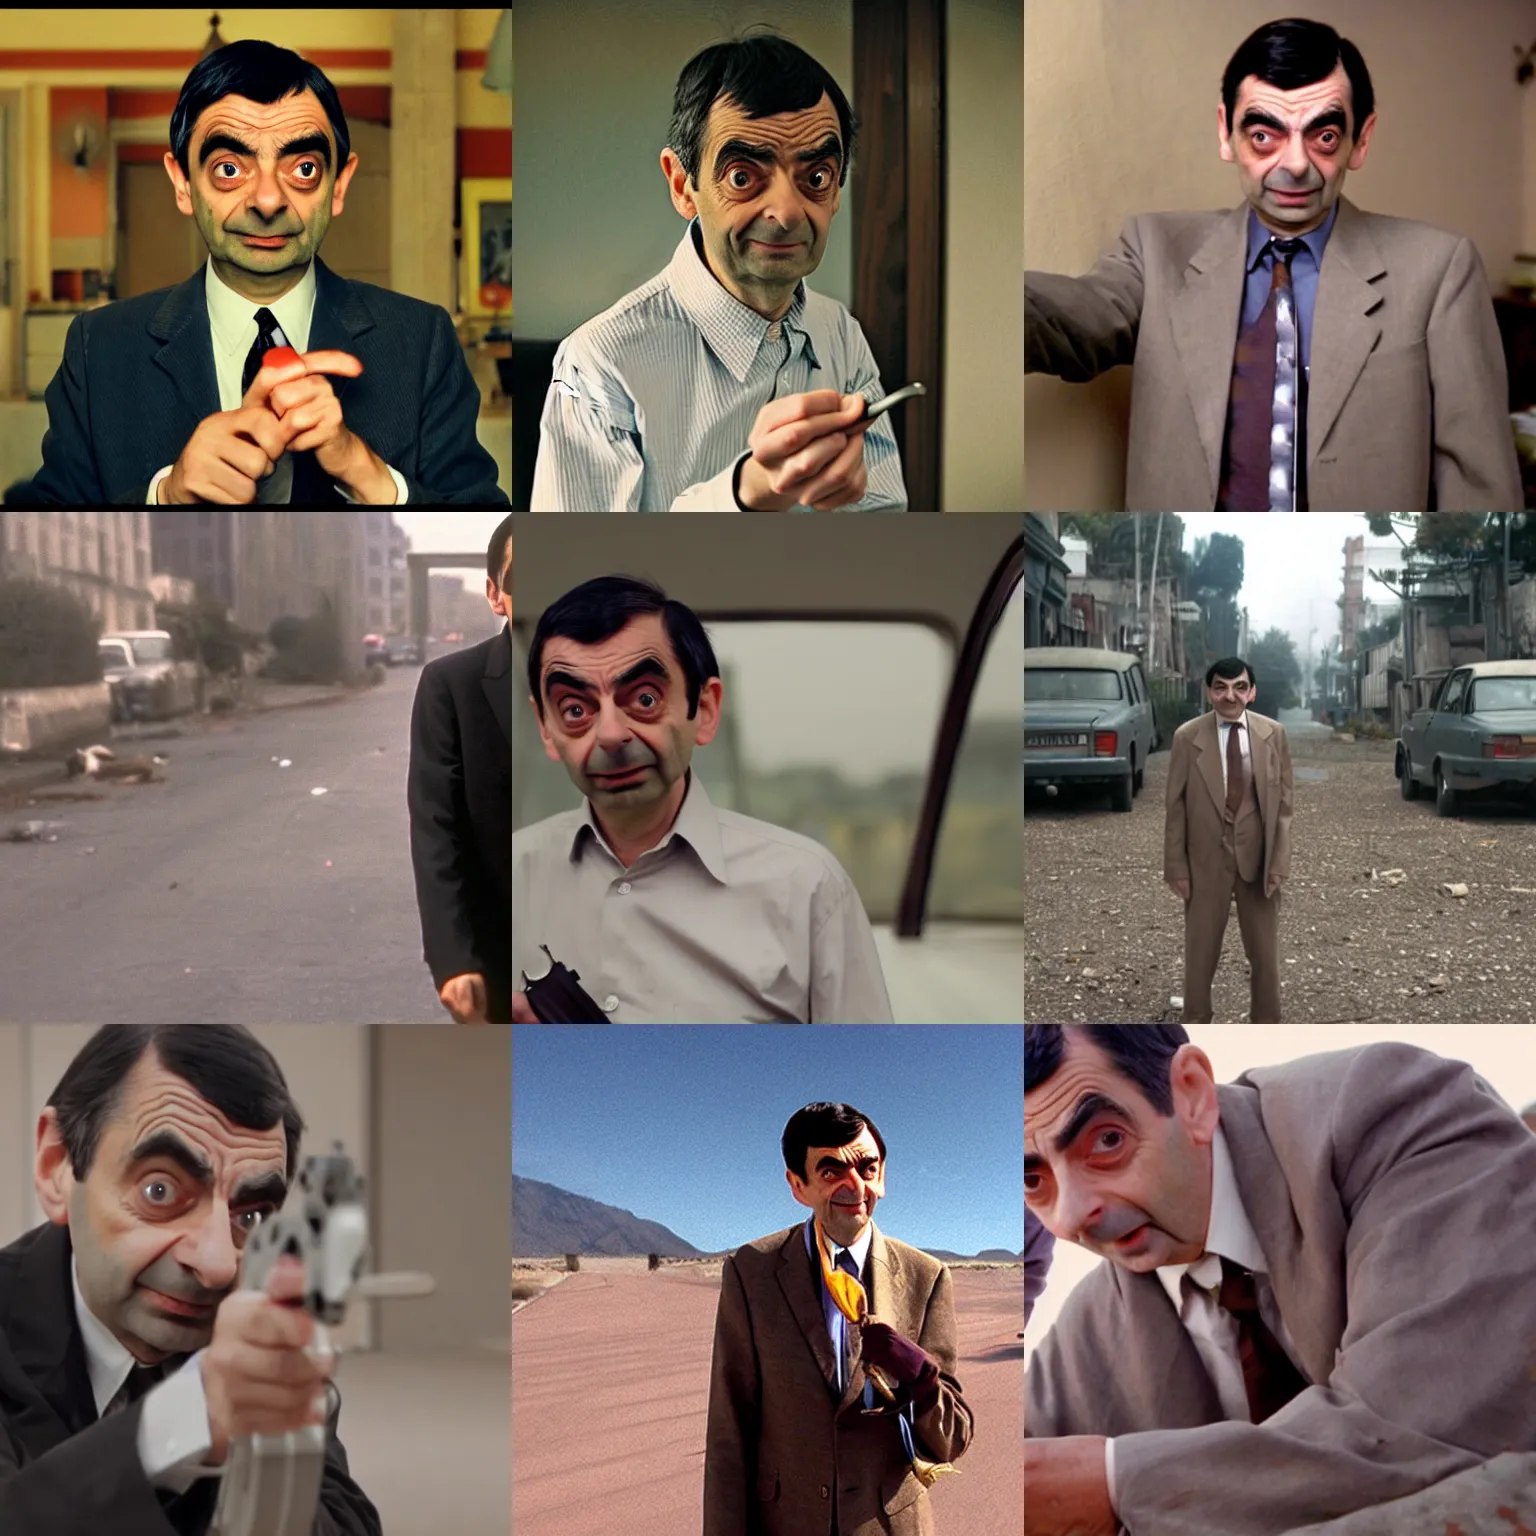 Prompt: A film still of Mr. Bean in The Act of Killing by Joshua Oppenheimer